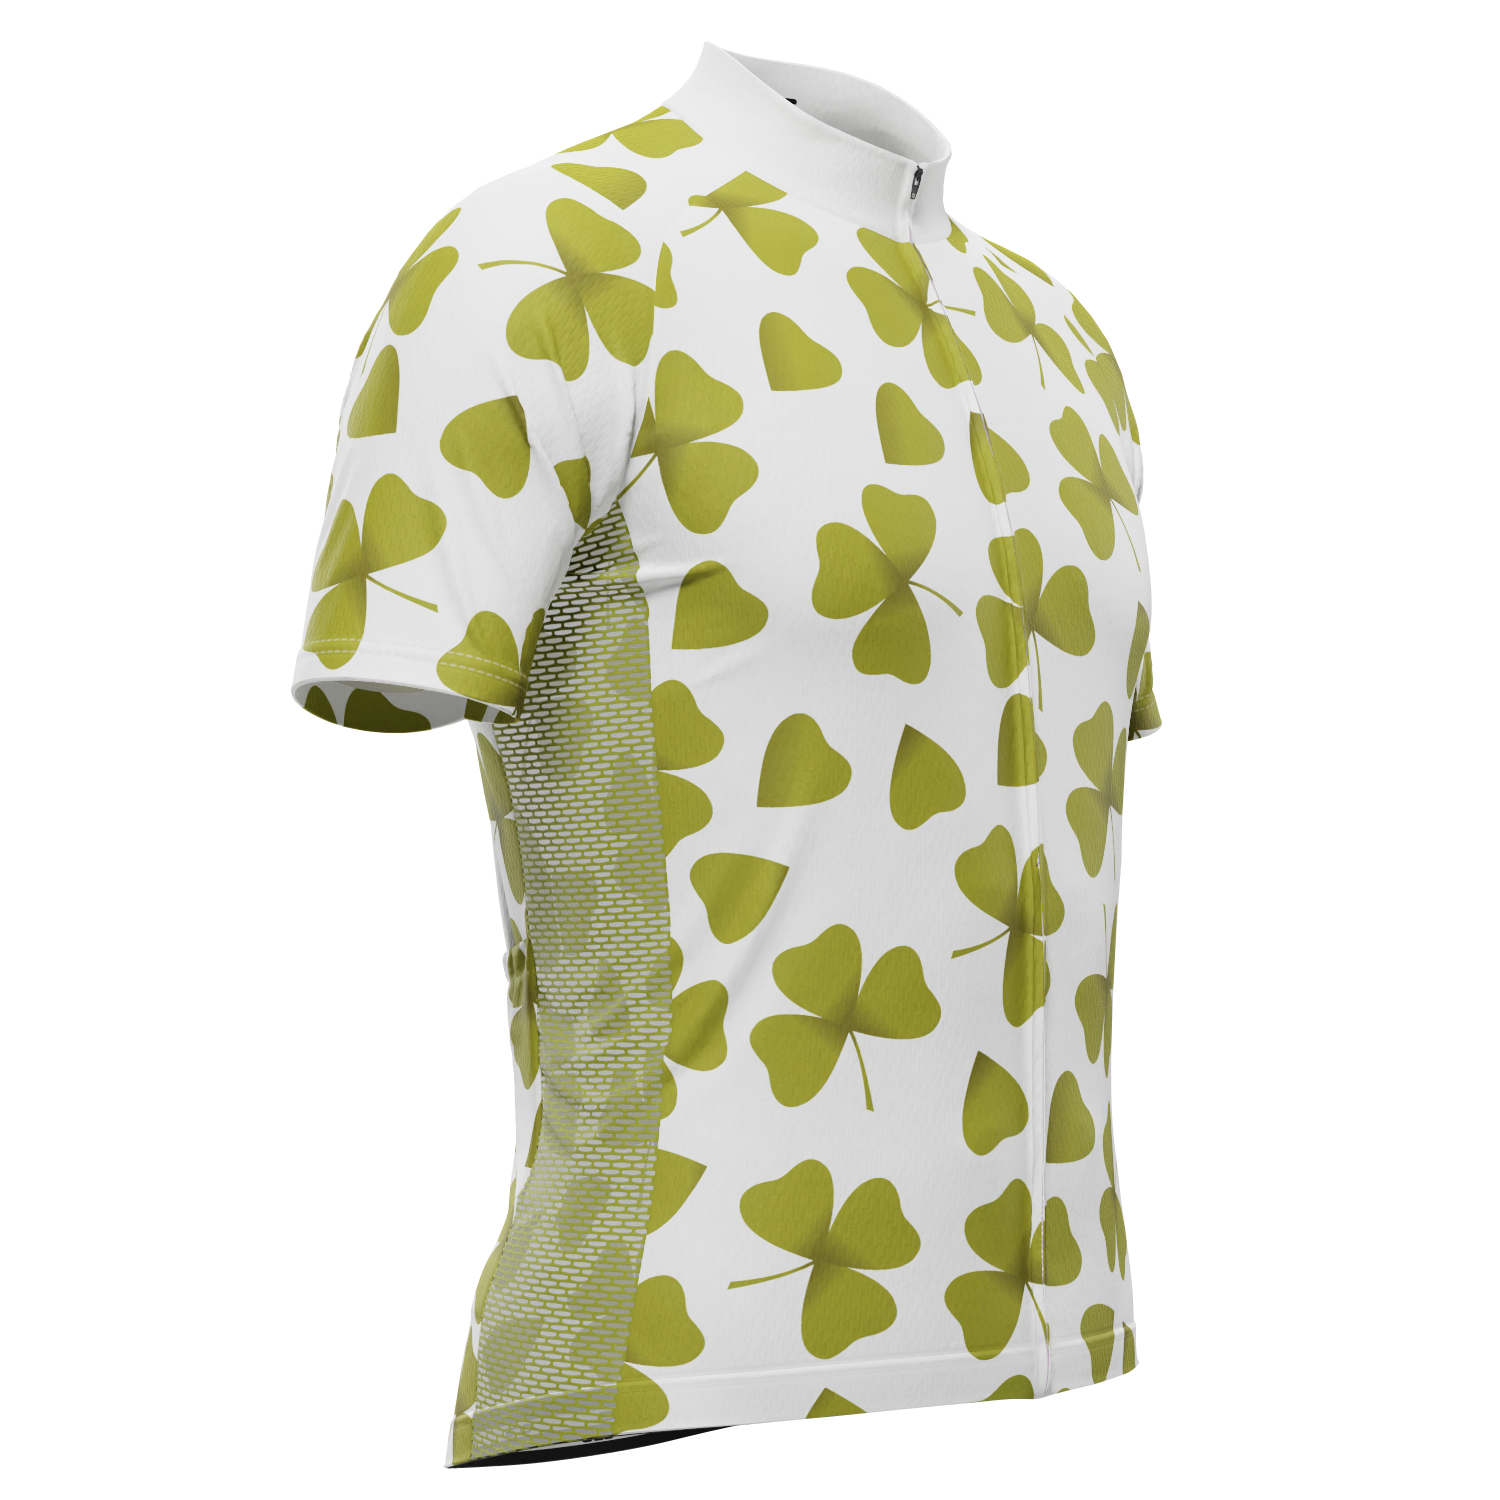 Men's Three Leaf Clover Short Sleeve Cycling Jersey